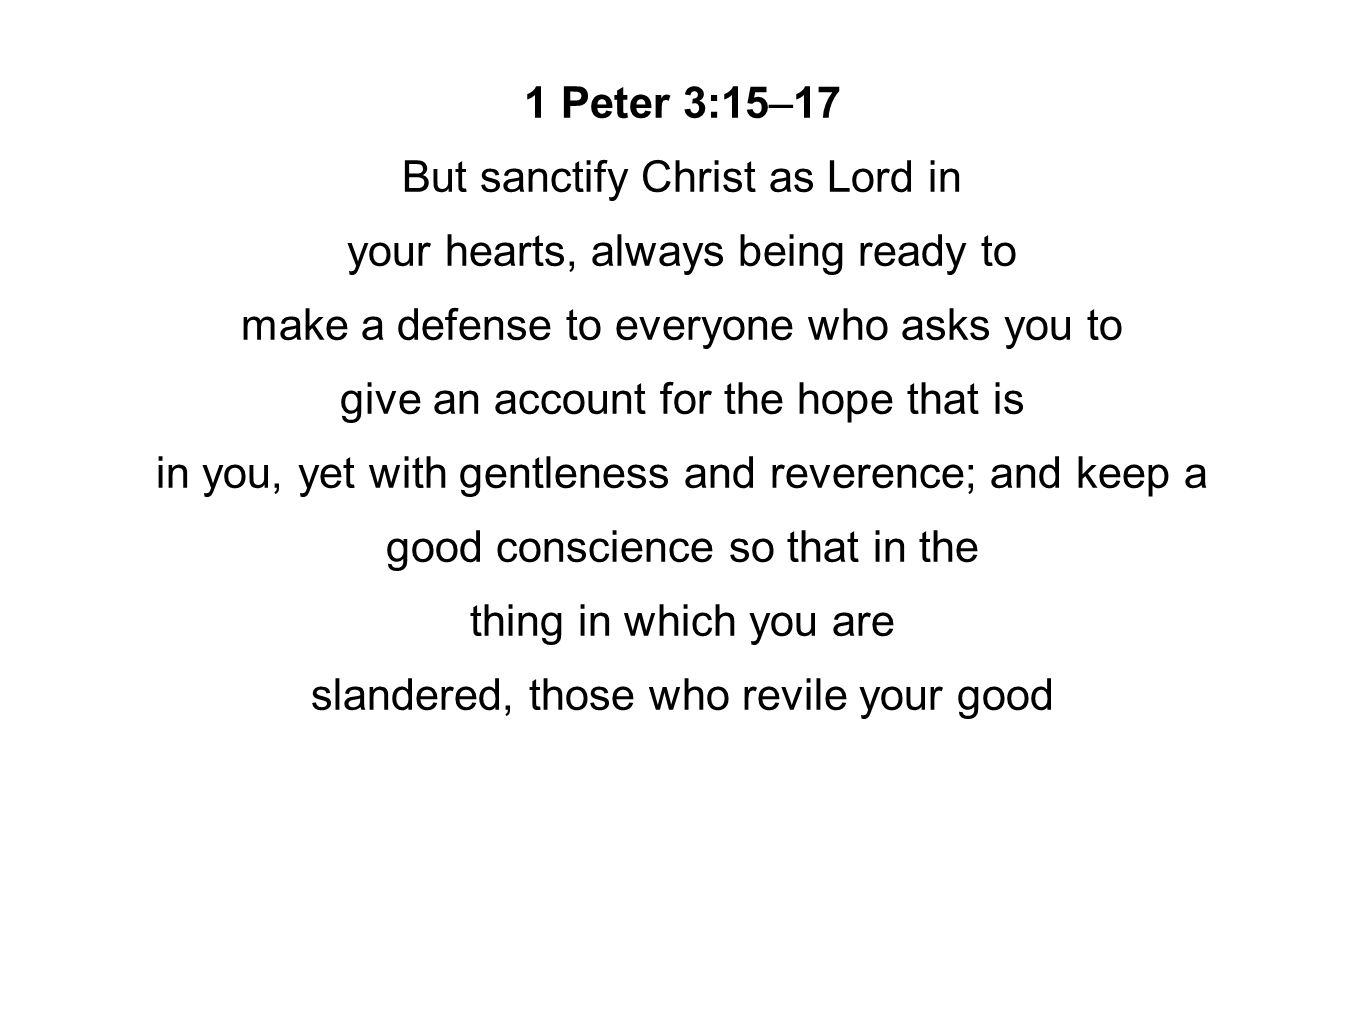 1 Peter 3:15–17 But sanctify Christ as Lord in your hearts, always being ready to make a defense to everyone who asks you to give an account for the hope that is in you, yet with gentleness and reverence; and keep a good conscience so that in the thing in which you are slandered, those who revile your good